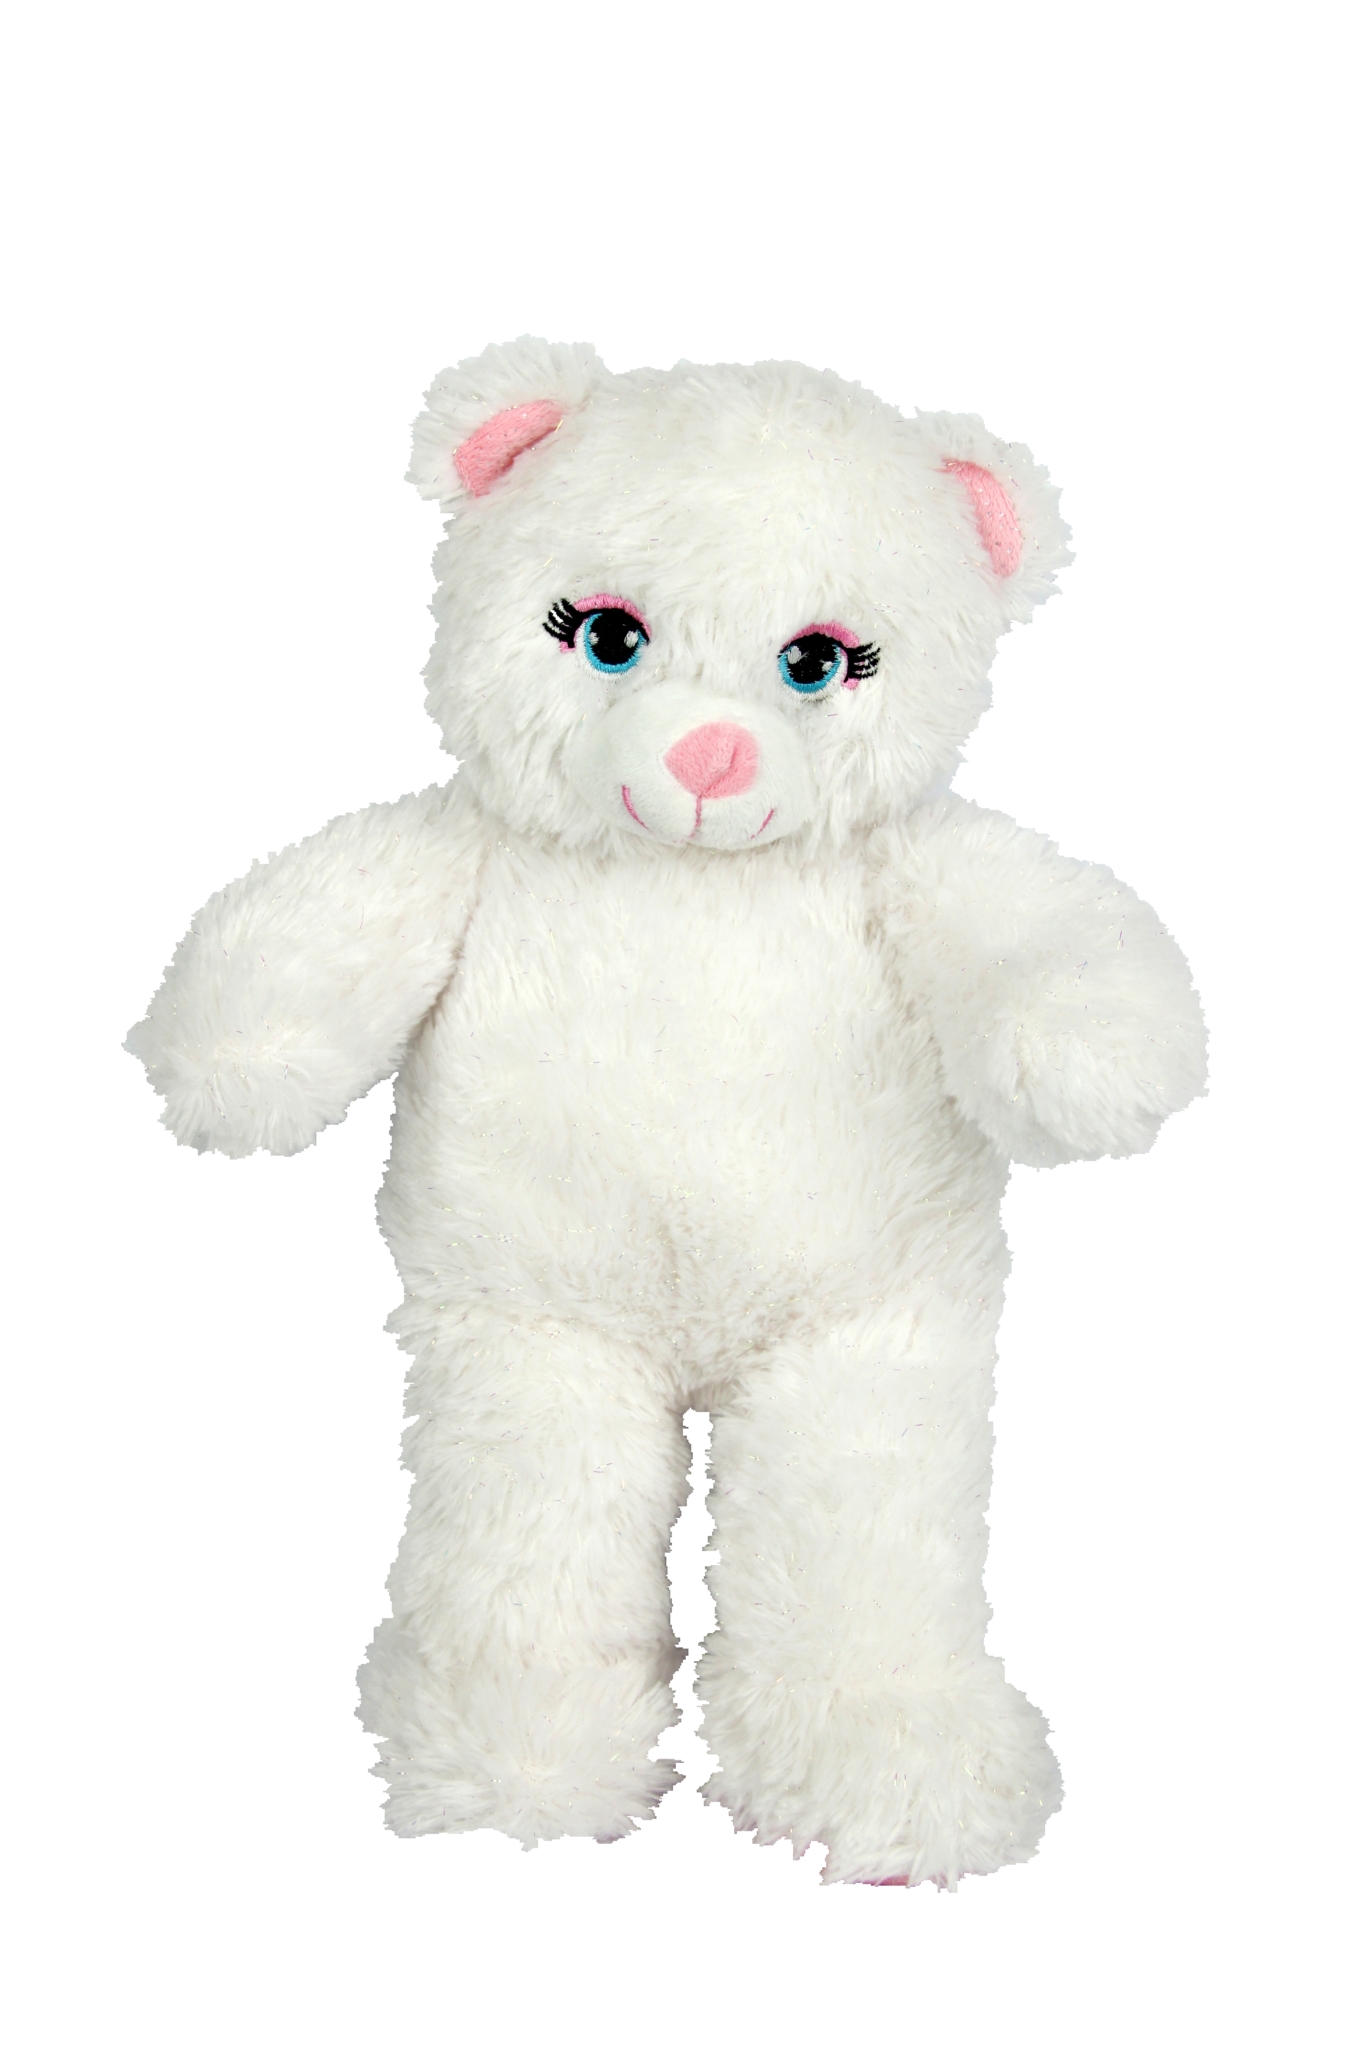 Teddy Bear Mobile - On-Site Animal Stuffing for Kids, Parties, & Events!